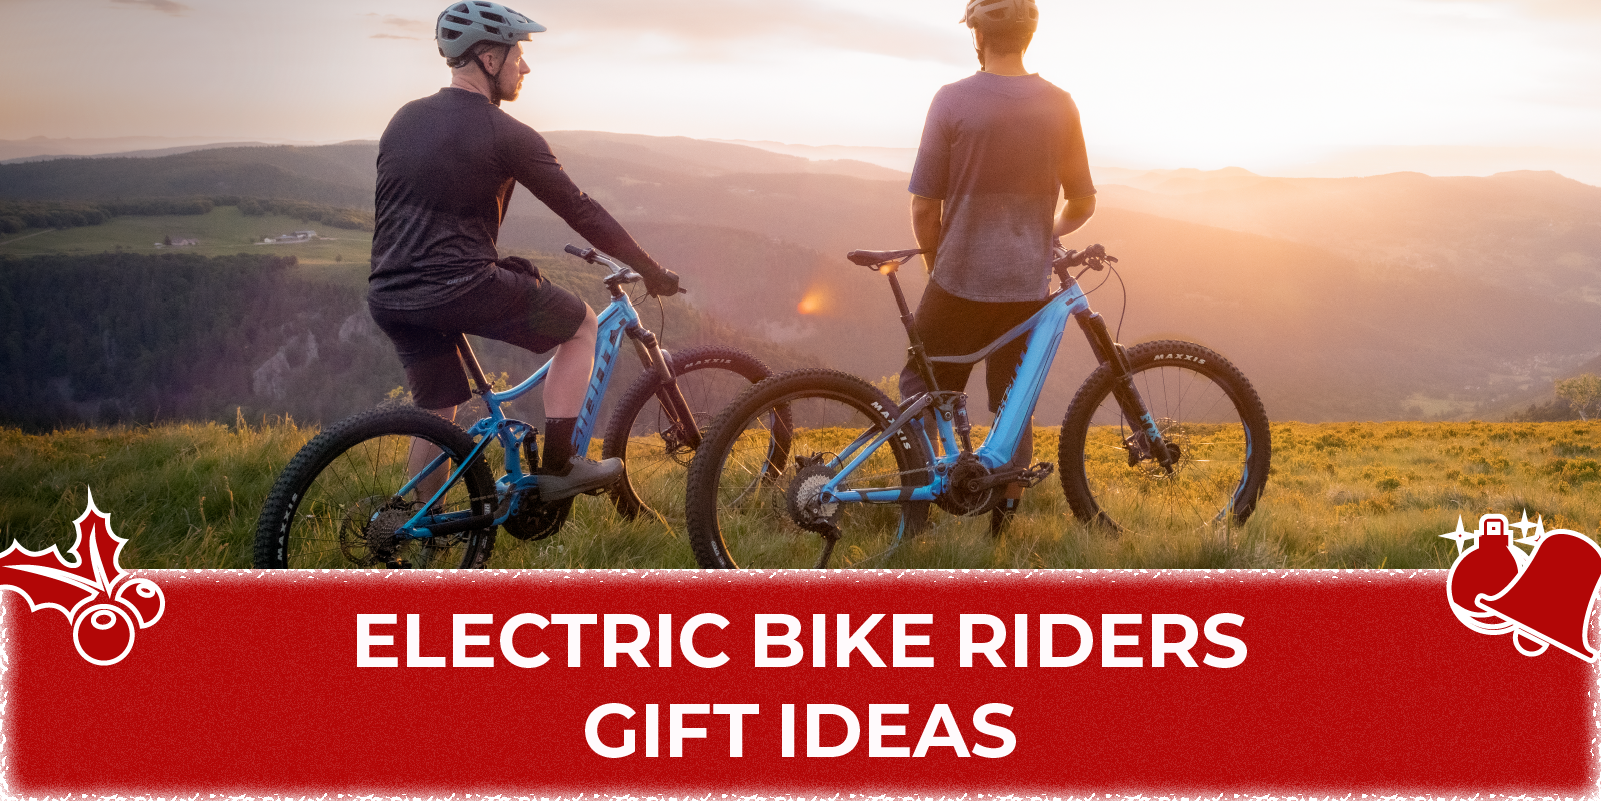 Electric Bikers Gift Ideas